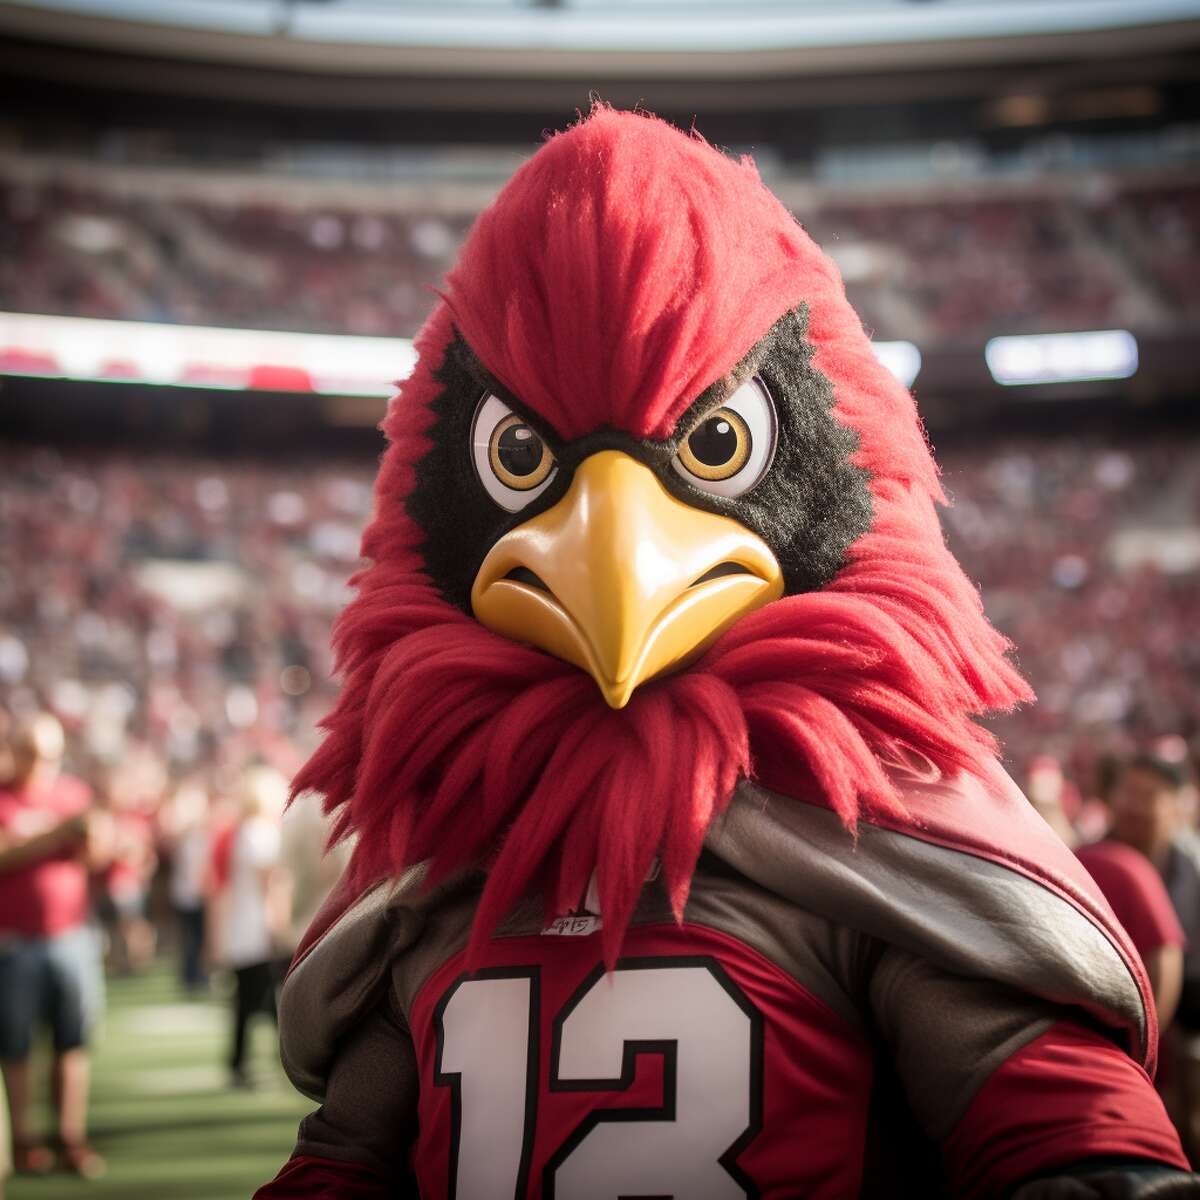 NFL mascots were recreated by AI, and they'll give you nightmares